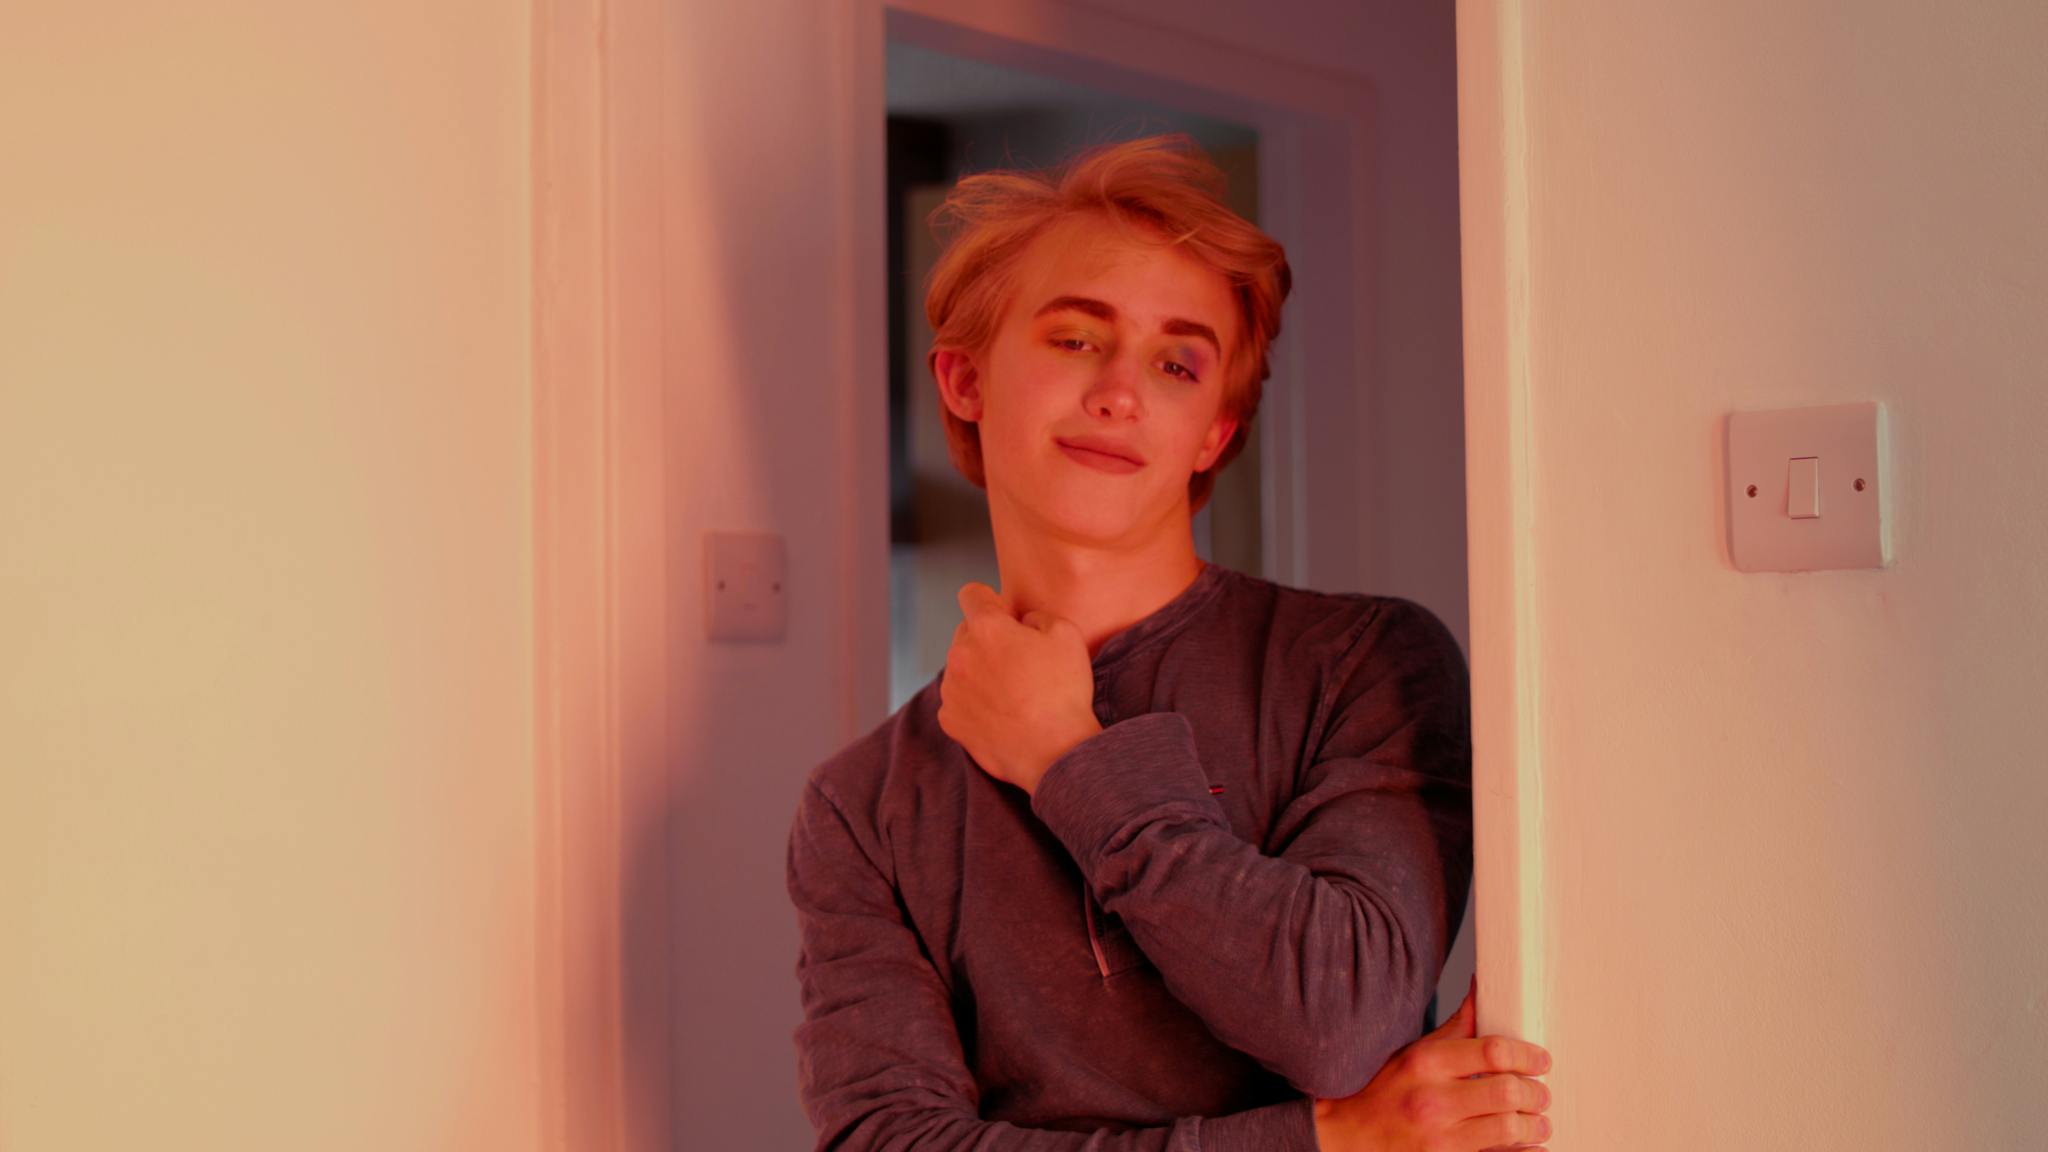 Image shows a young individual with blonde hair in a door frame with soft pink and purple lighting